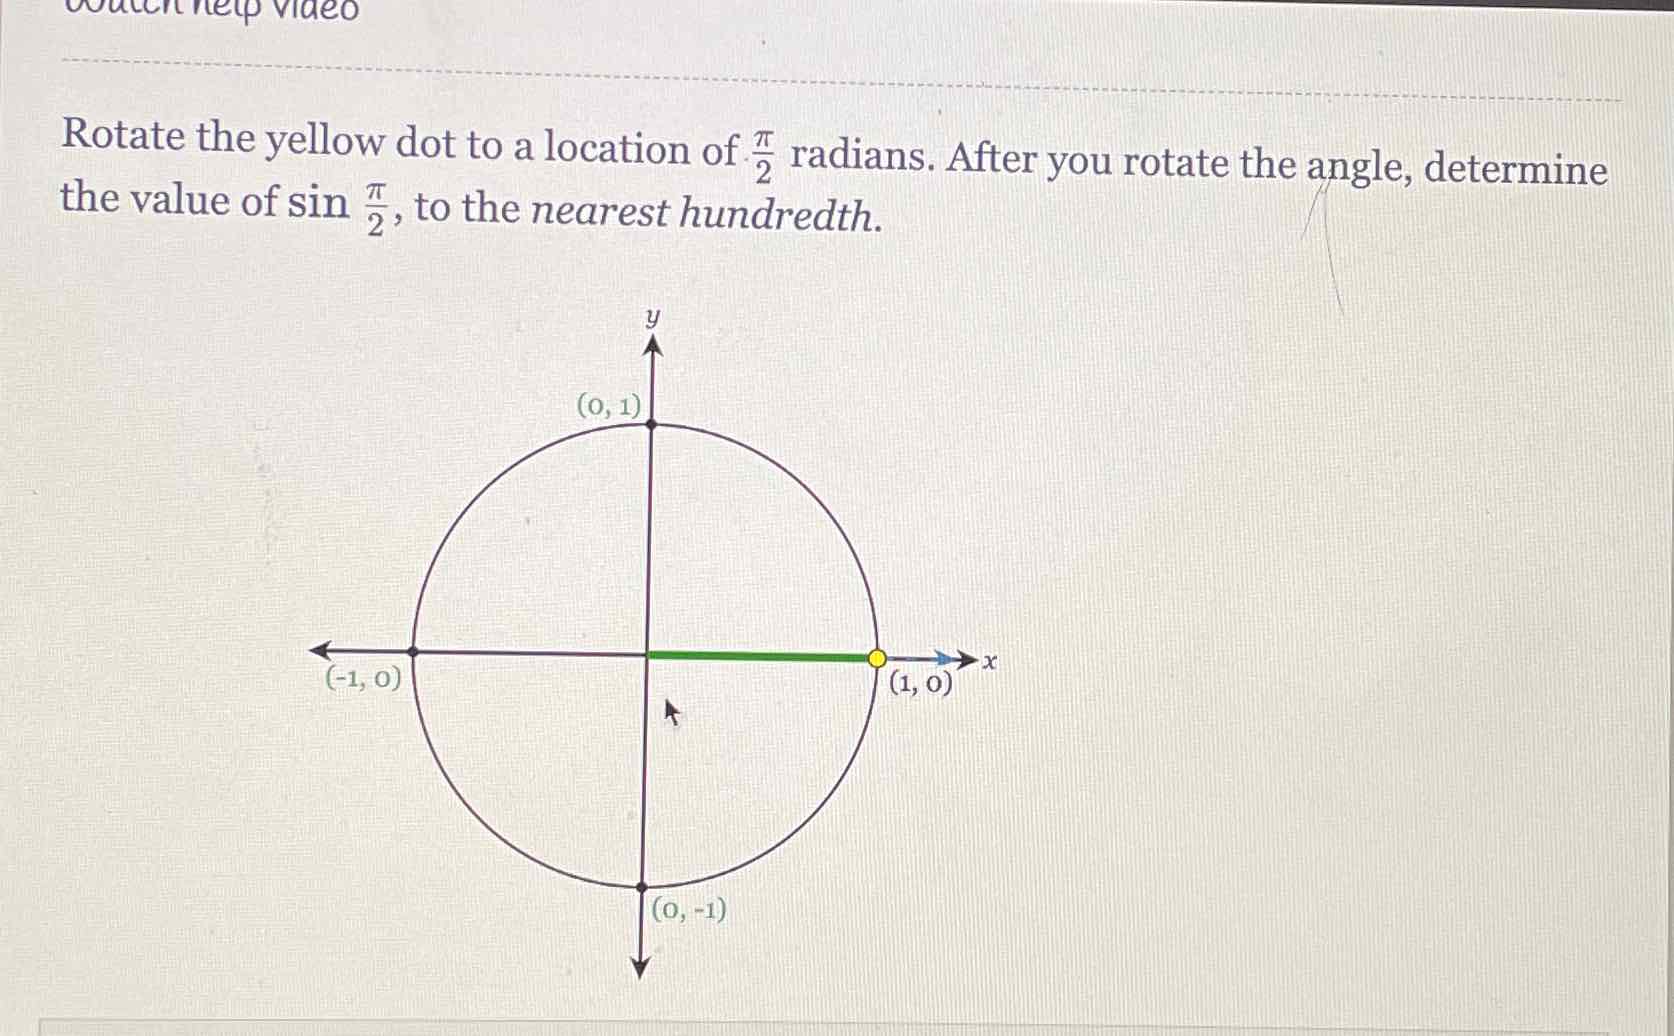 Rotate the yellow dot to a location of \( \frac{\pi}{2} \) radians. After you rotate the angle, determine the value of \( \sin \frac{\pi}{2} \), to the nearest hundredth.